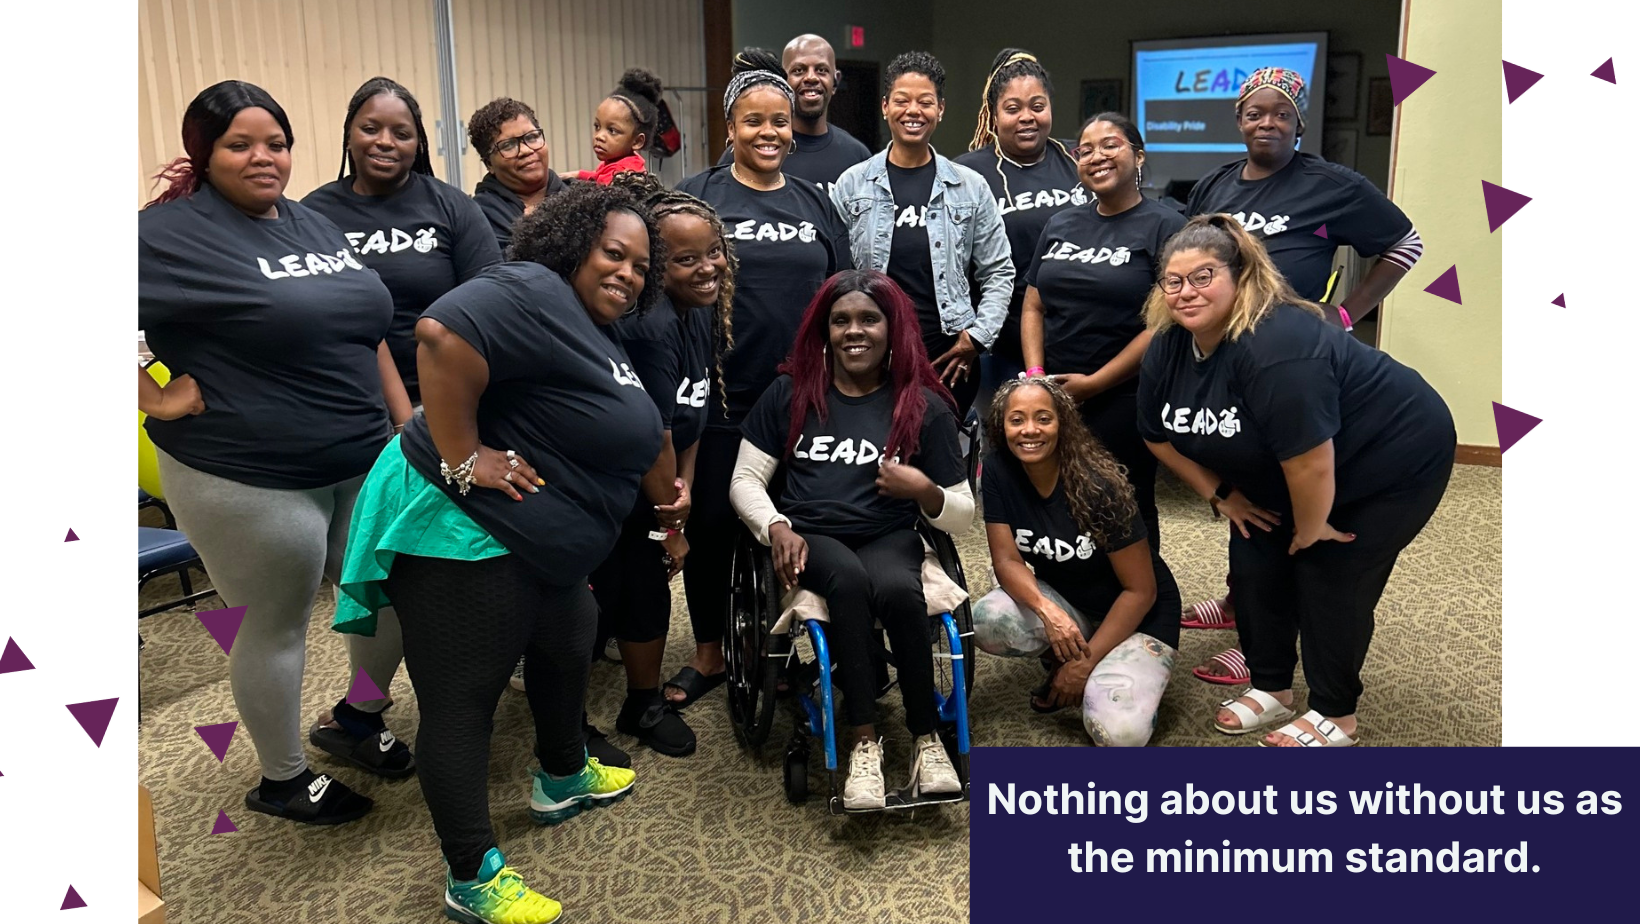 text "Nothing about us, without us as the minimum standard." Photo of 13 individuals smiling at the camera wearing the MDRC LEAD shirt.